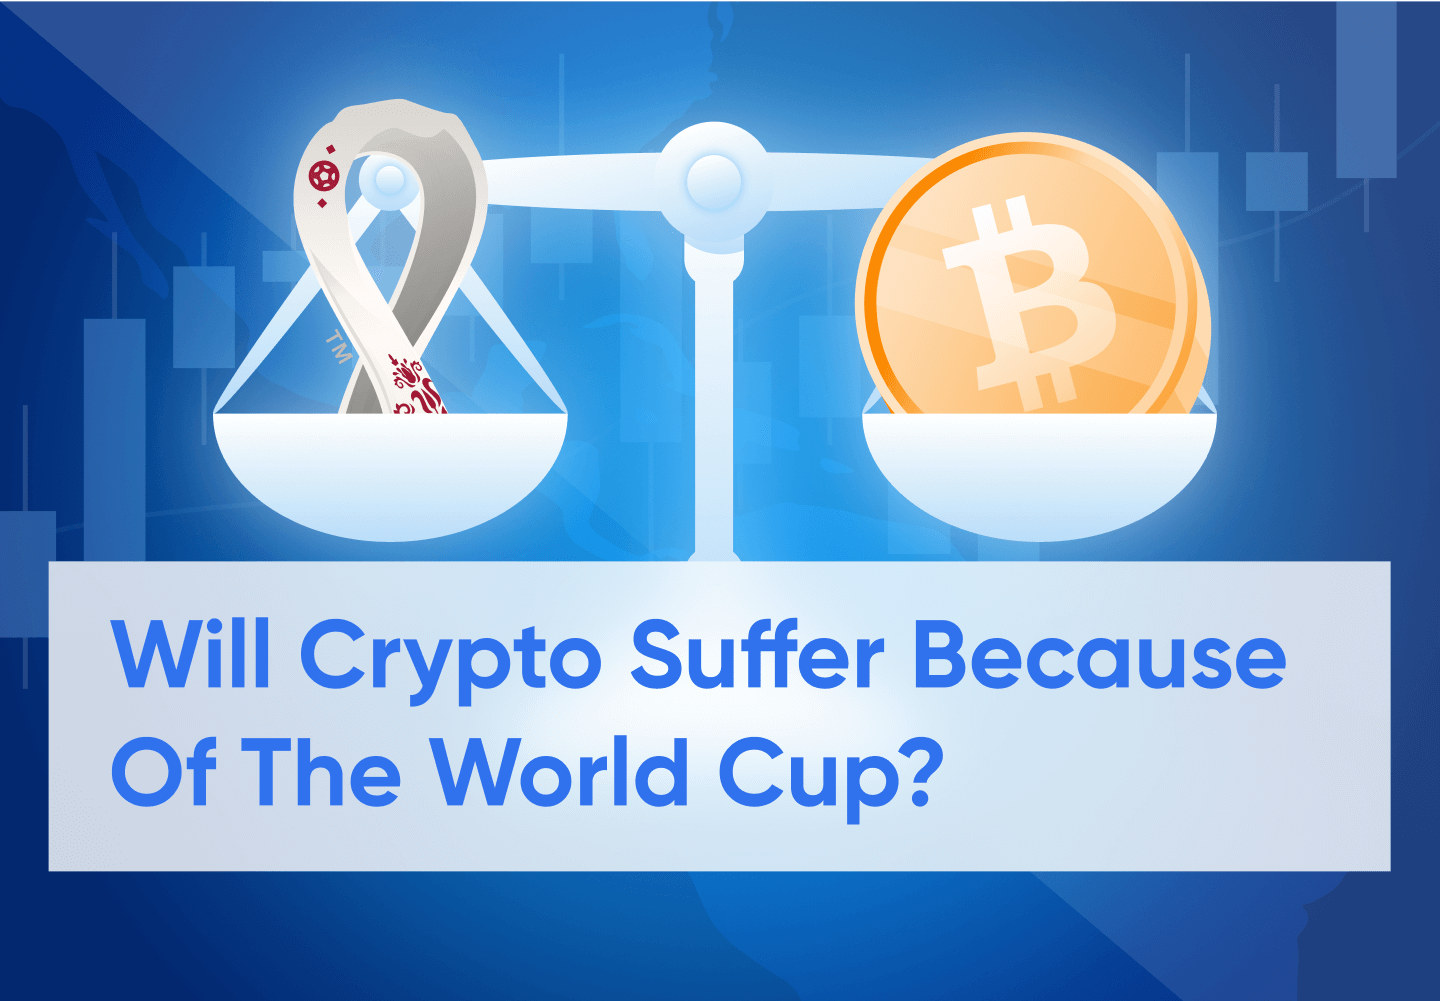 How will the World Cup Affect the Crypto Market?